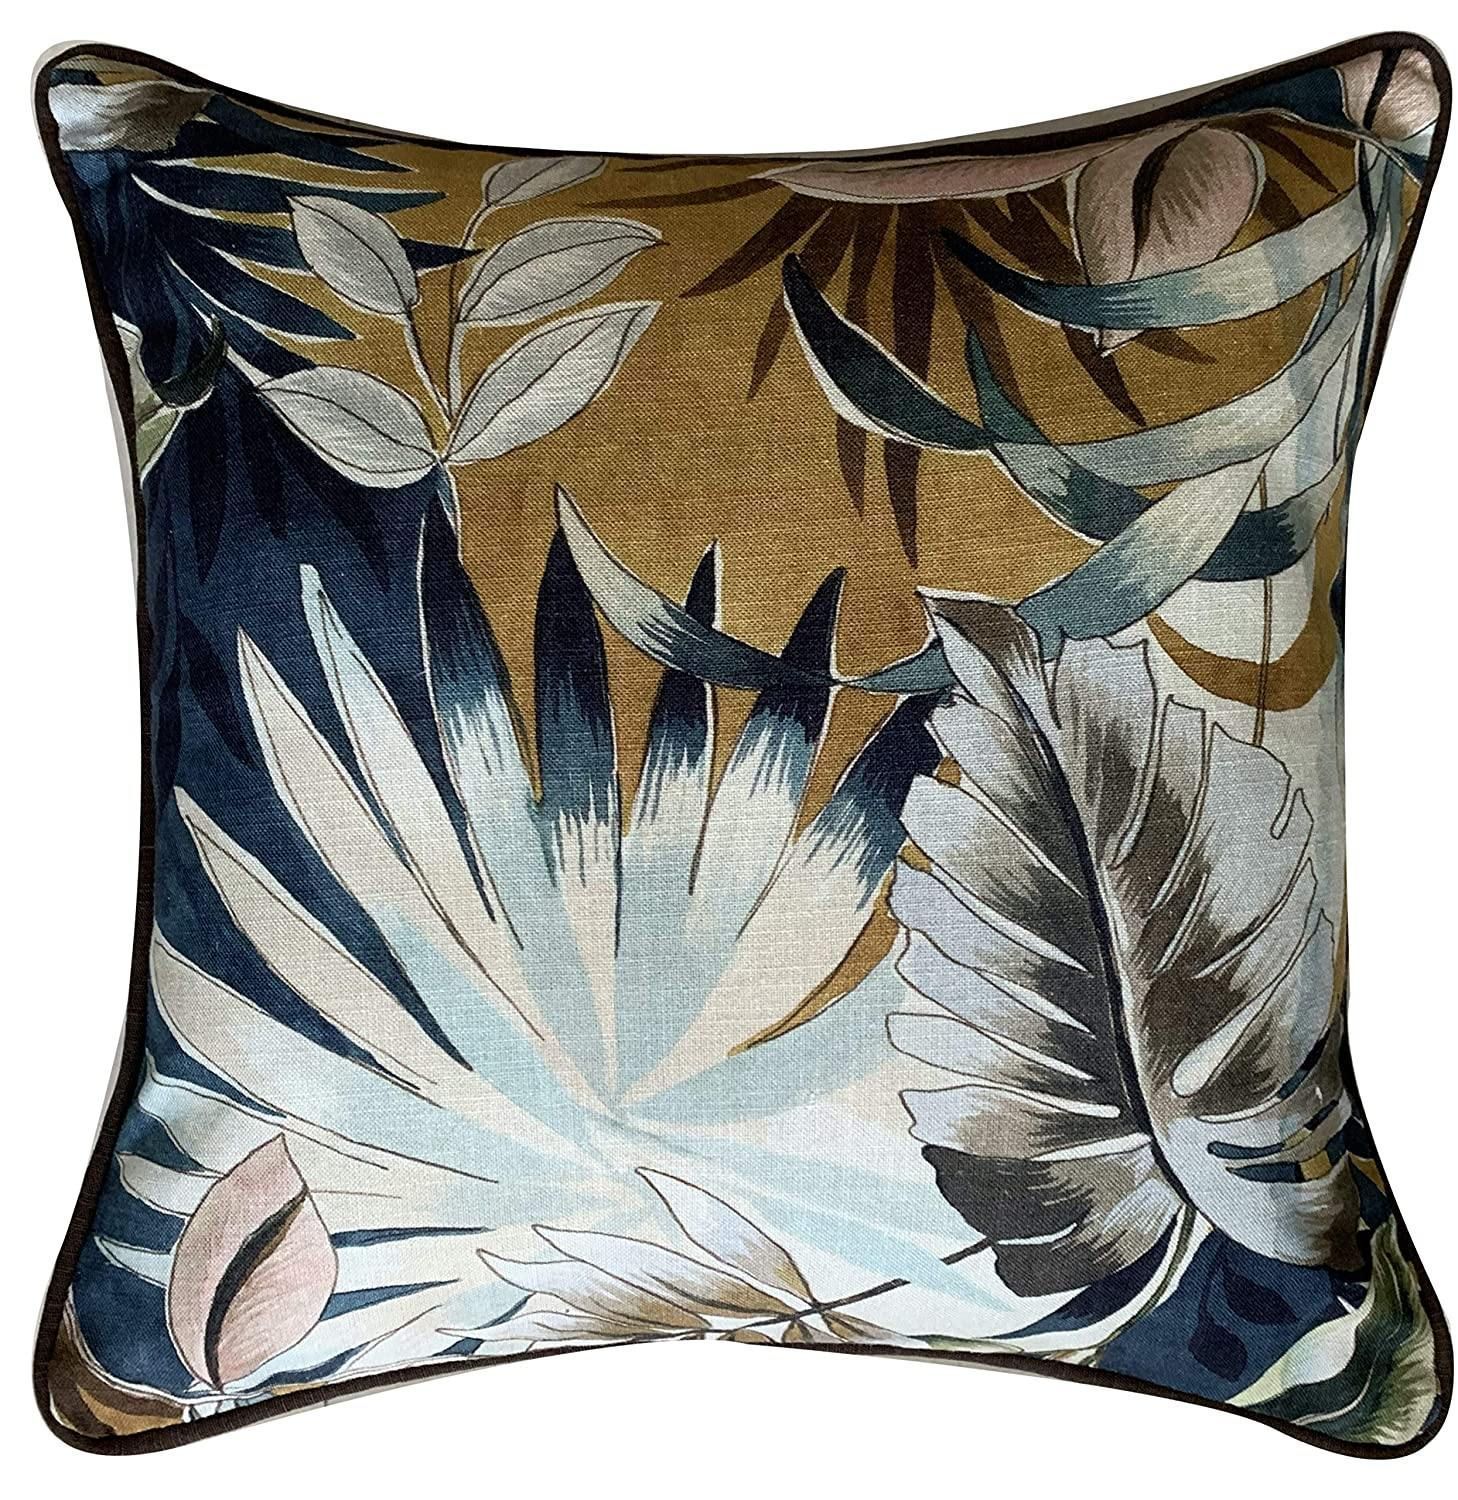 Mystic Forest Modern Chic Designer Printed Cotton Cushion Cover (Multicolour, 16 x 16 inch)